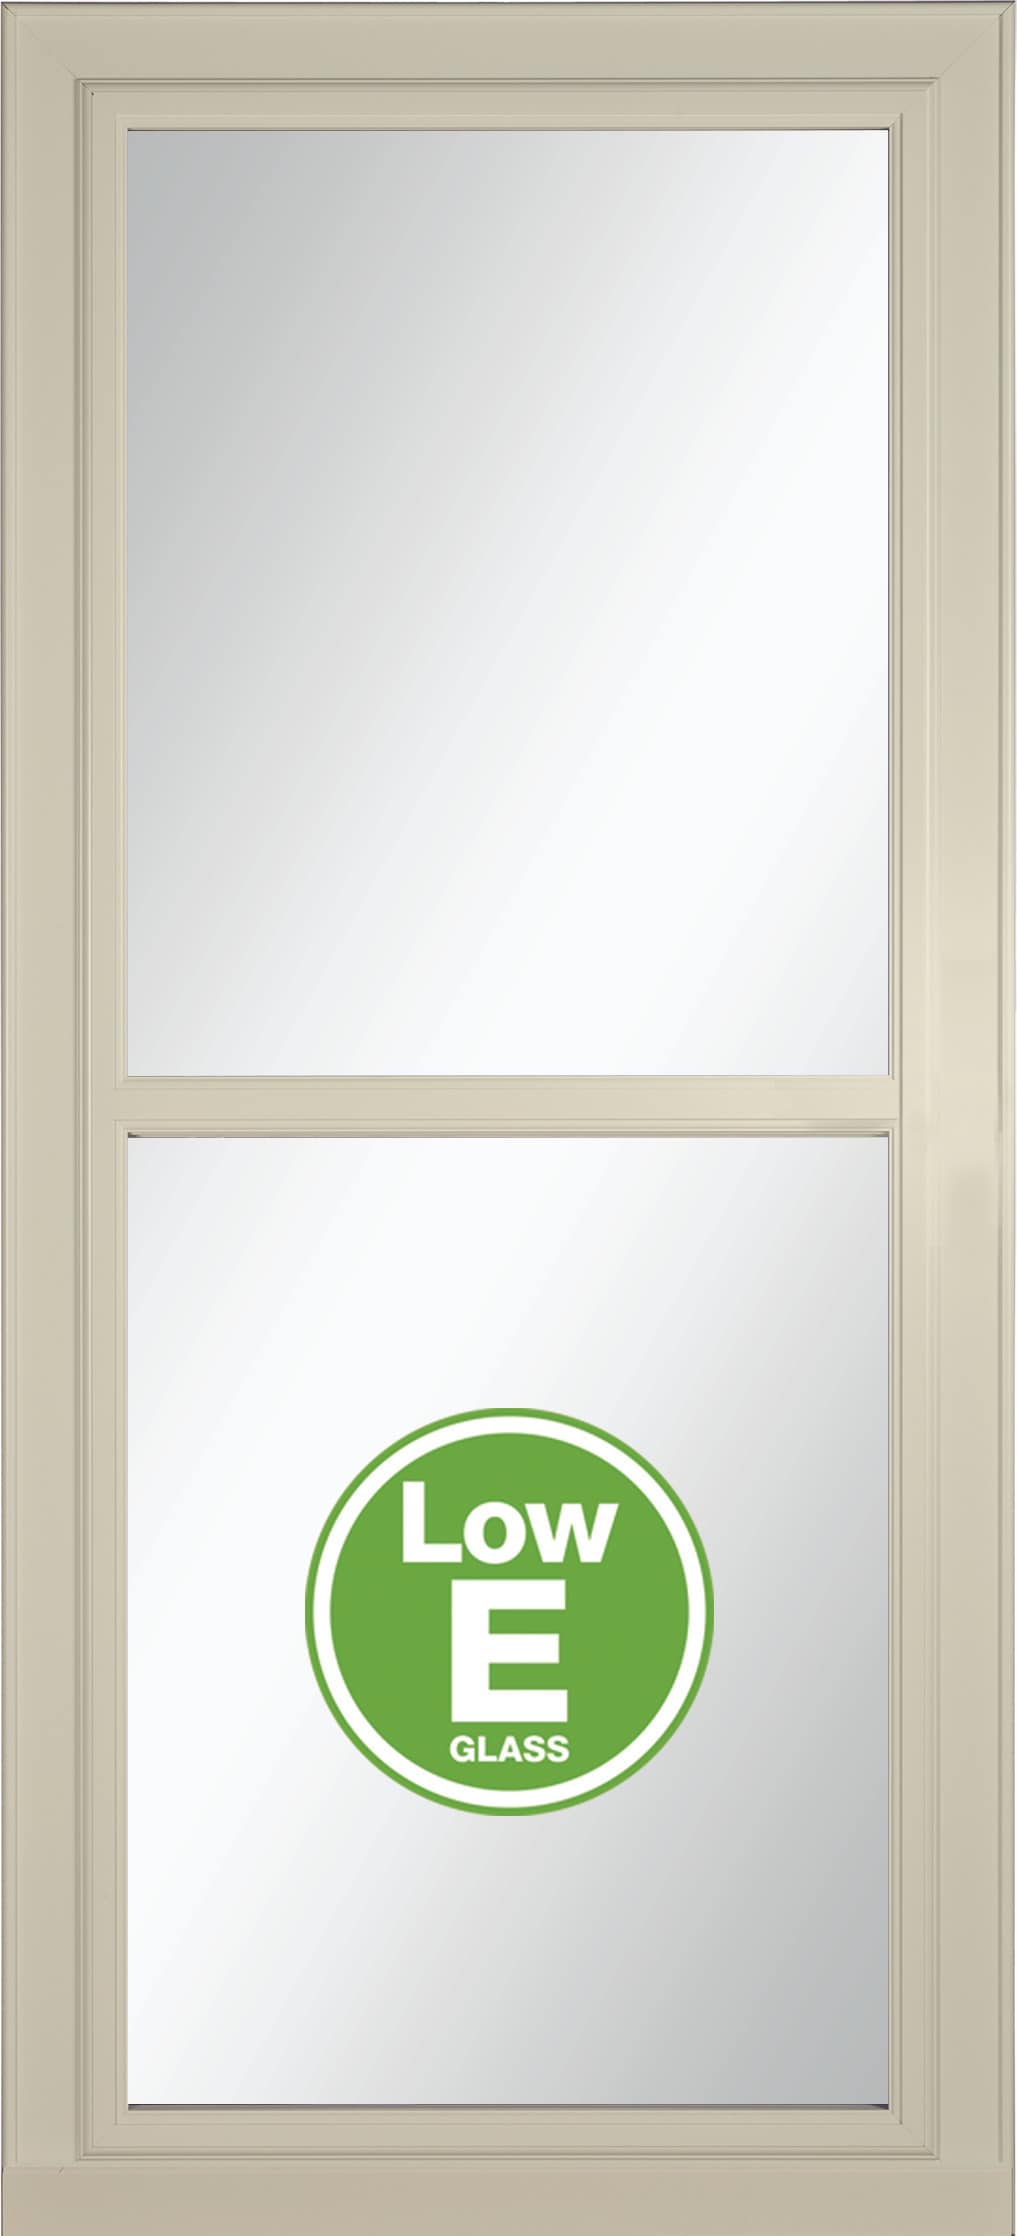 Tradewinds Selection Low-E 36-in x 81-in Almond Full-view Retractable Screen Aluminum Storm Door in Off-White | - LARSON 14604082E